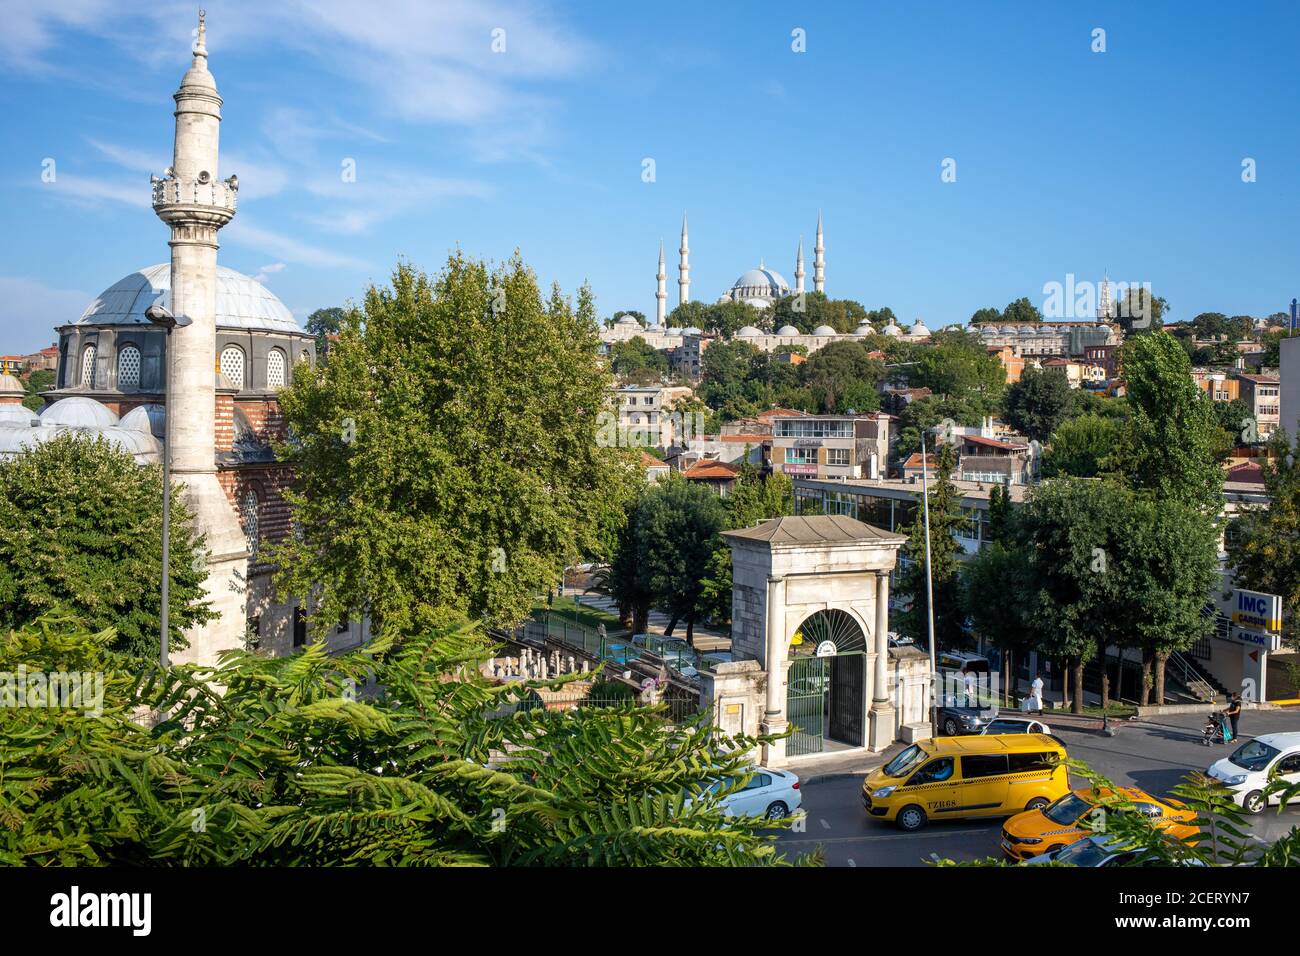 Sep Sefa Hatun Mosque in Unkapani and Suleymaniye mosque and district in the background, Istanbul, Turkey on August 20, 2020. Stock Photo